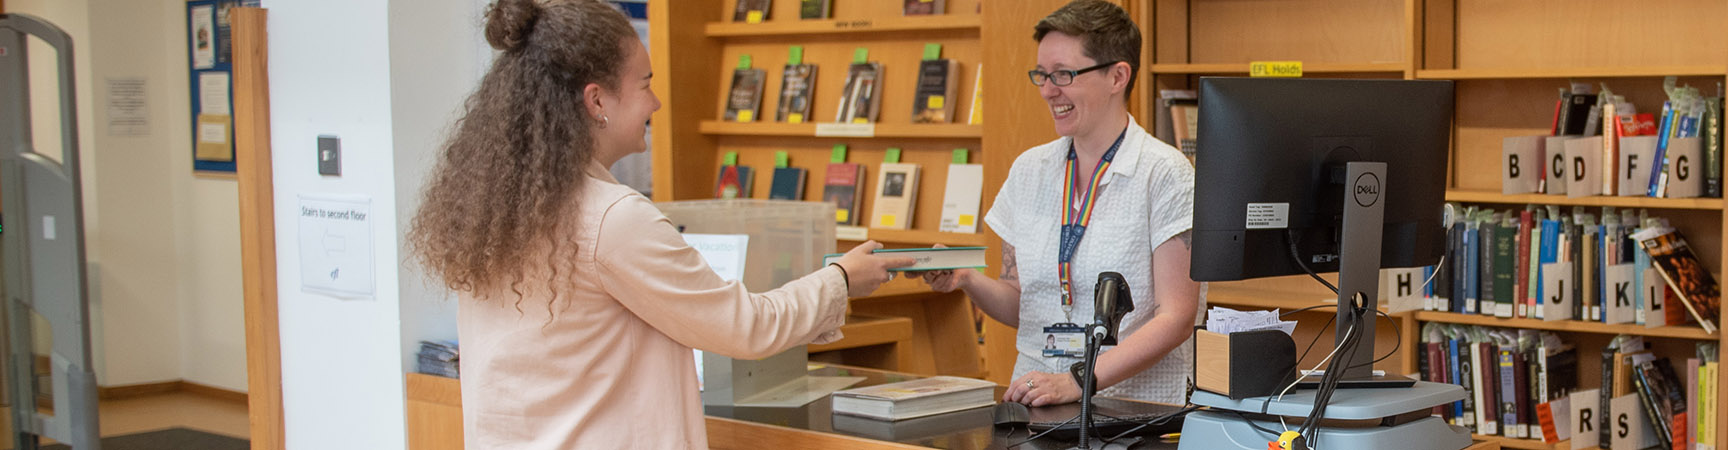 A student handing a book to a librarian at the information desk